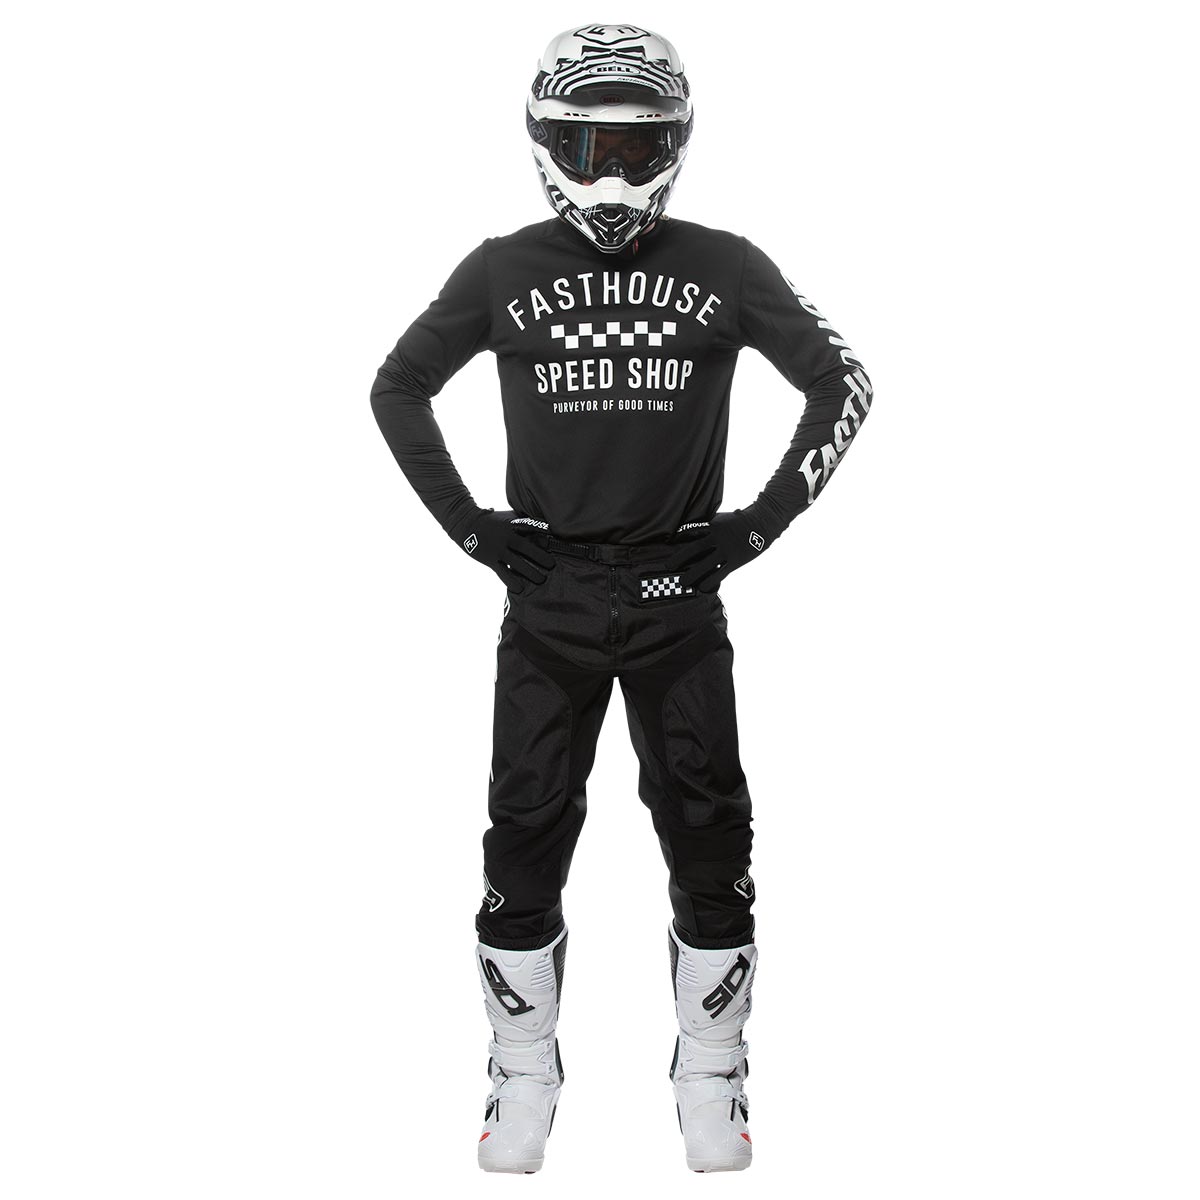 Fasthouse Carbon Jersey and Grindhouse Pants- Black